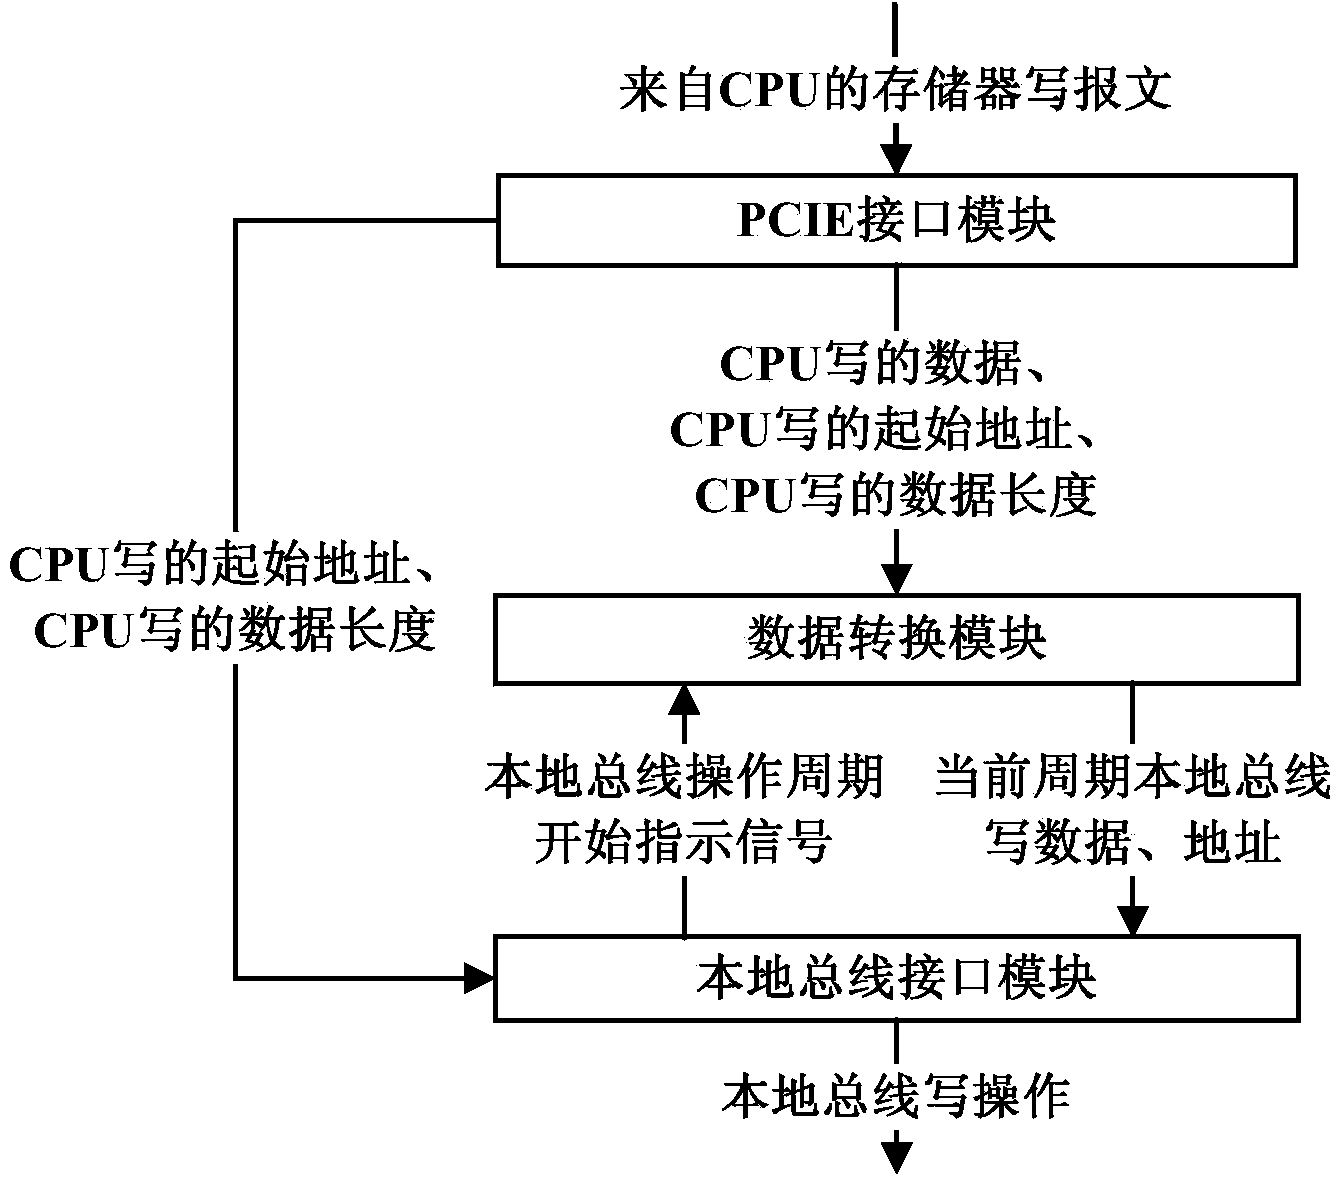 Device and method for CPU (central processing unit) to access local bus on basis of PCIE (peripheral component interface express) protocol